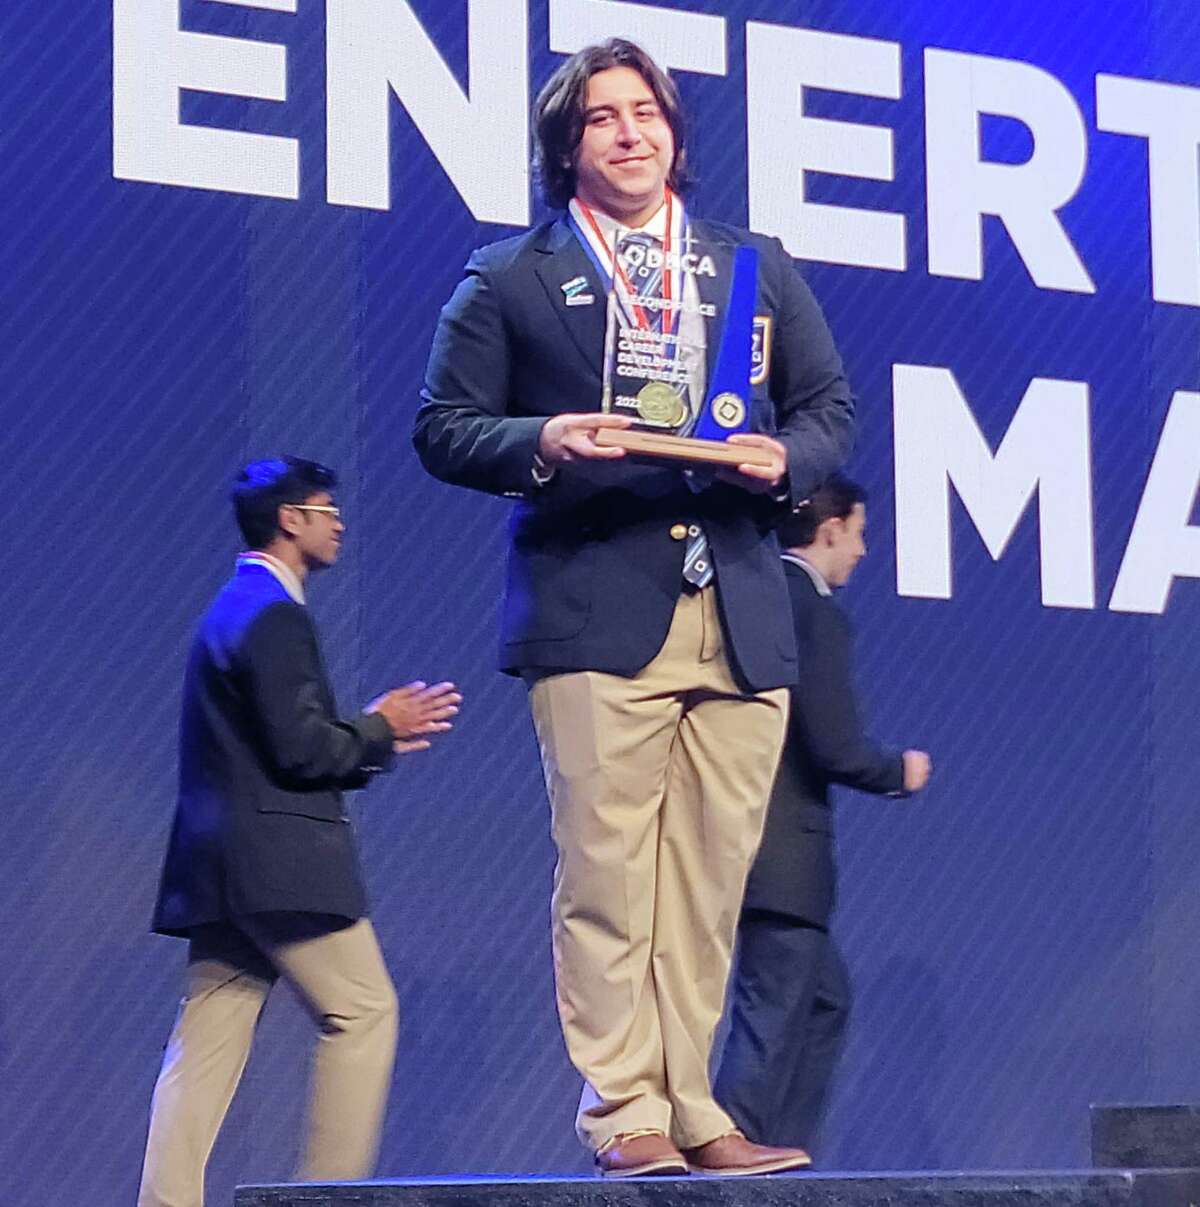 Middletown DECA members earned the organization’s highest honors at the annual International Career Development Conference in Atlanta April 23 to 26.